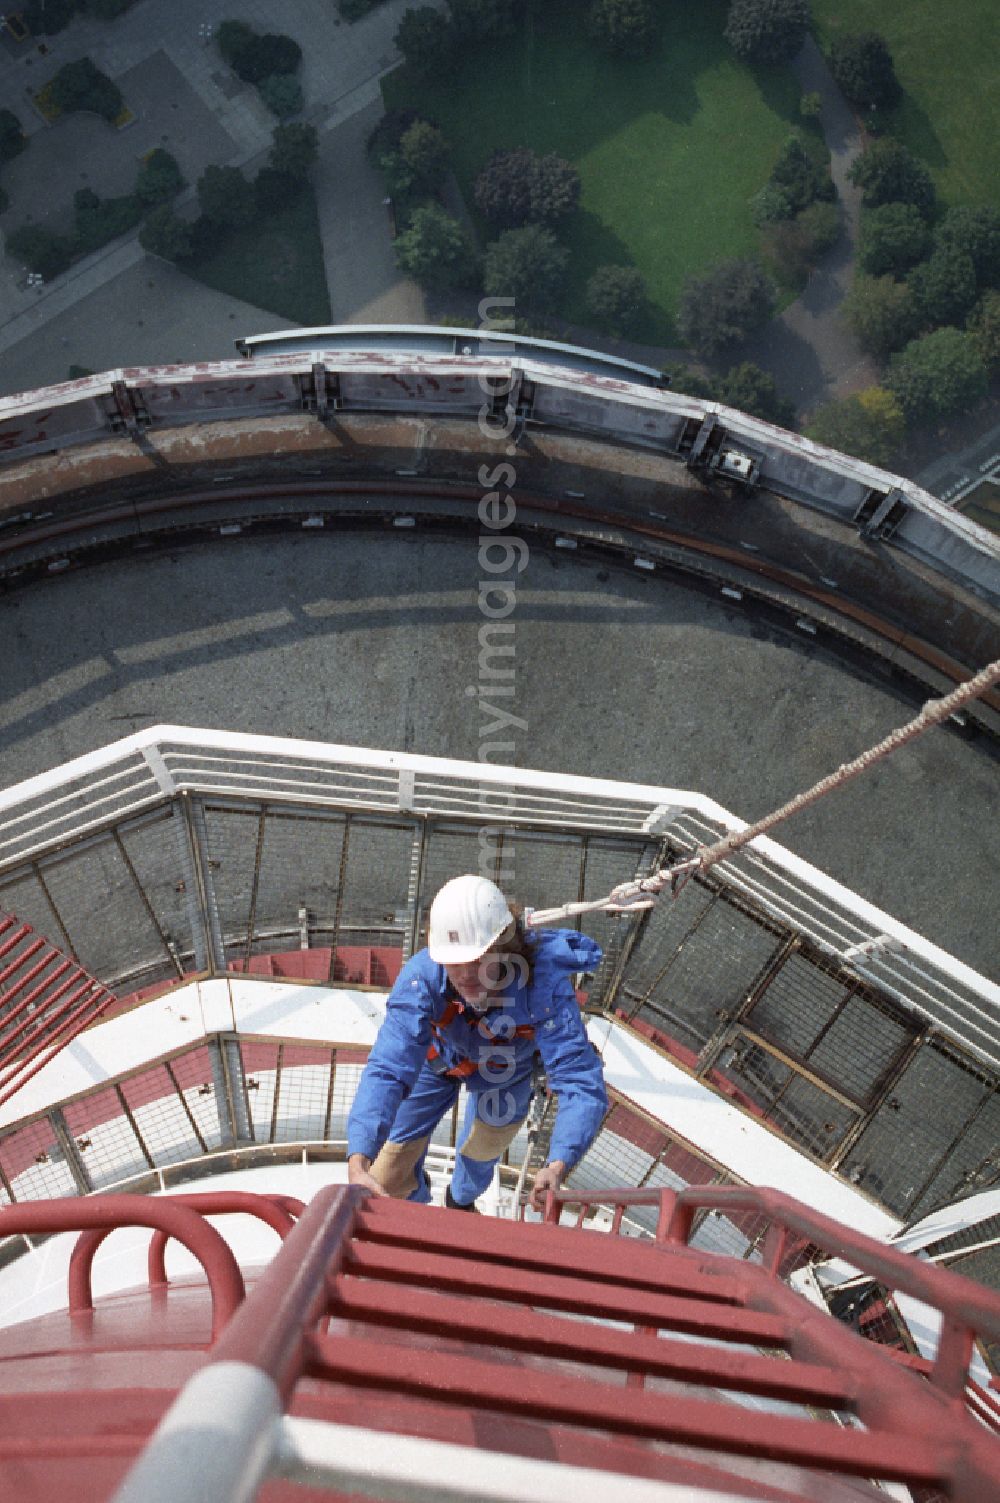 GDR image archive: Berlin - Technicians during maintenance and repair work during external work on the antenna support of the Berlin TV tower in the Mitte district of Berlin East Berlin